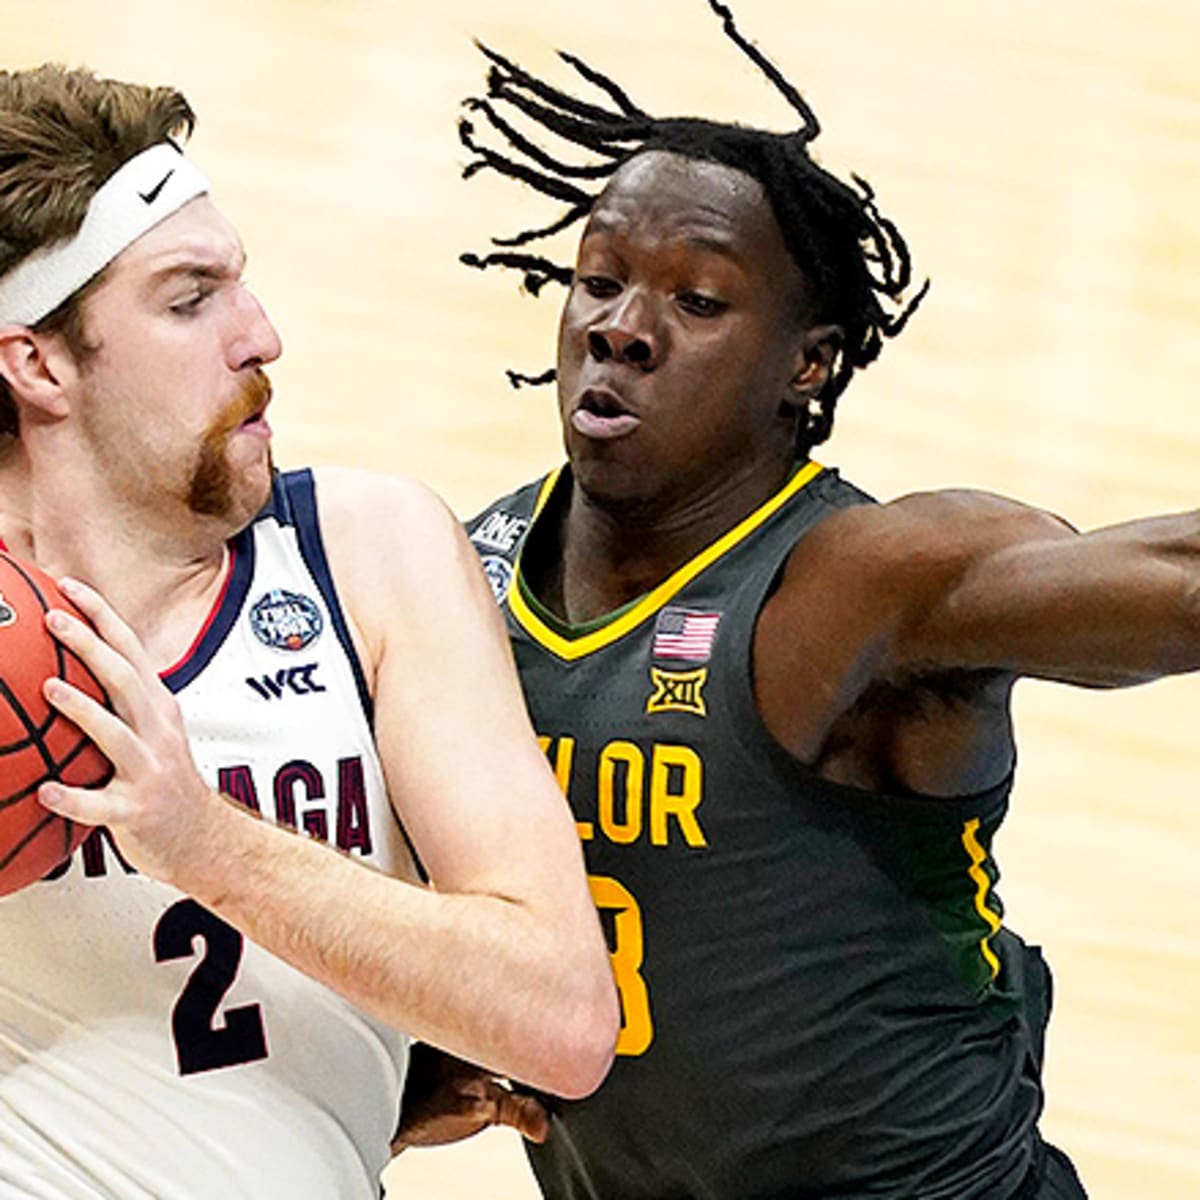 Athlon Sports' 2021-22 Top 100 College Basketball Players